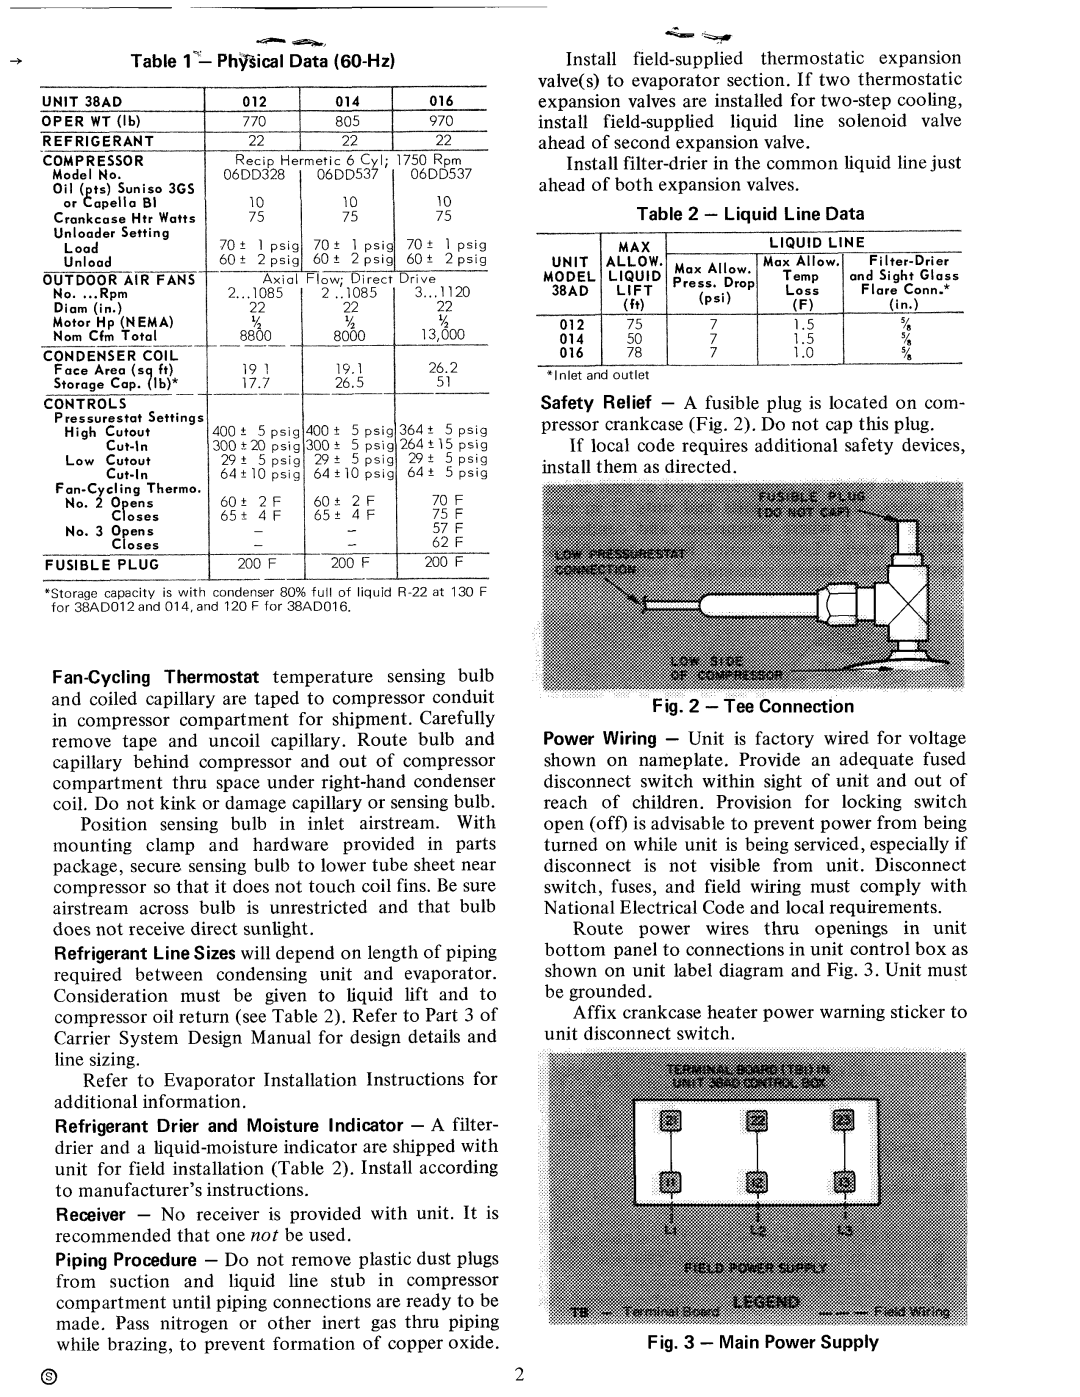 Carrier 38AD manual 